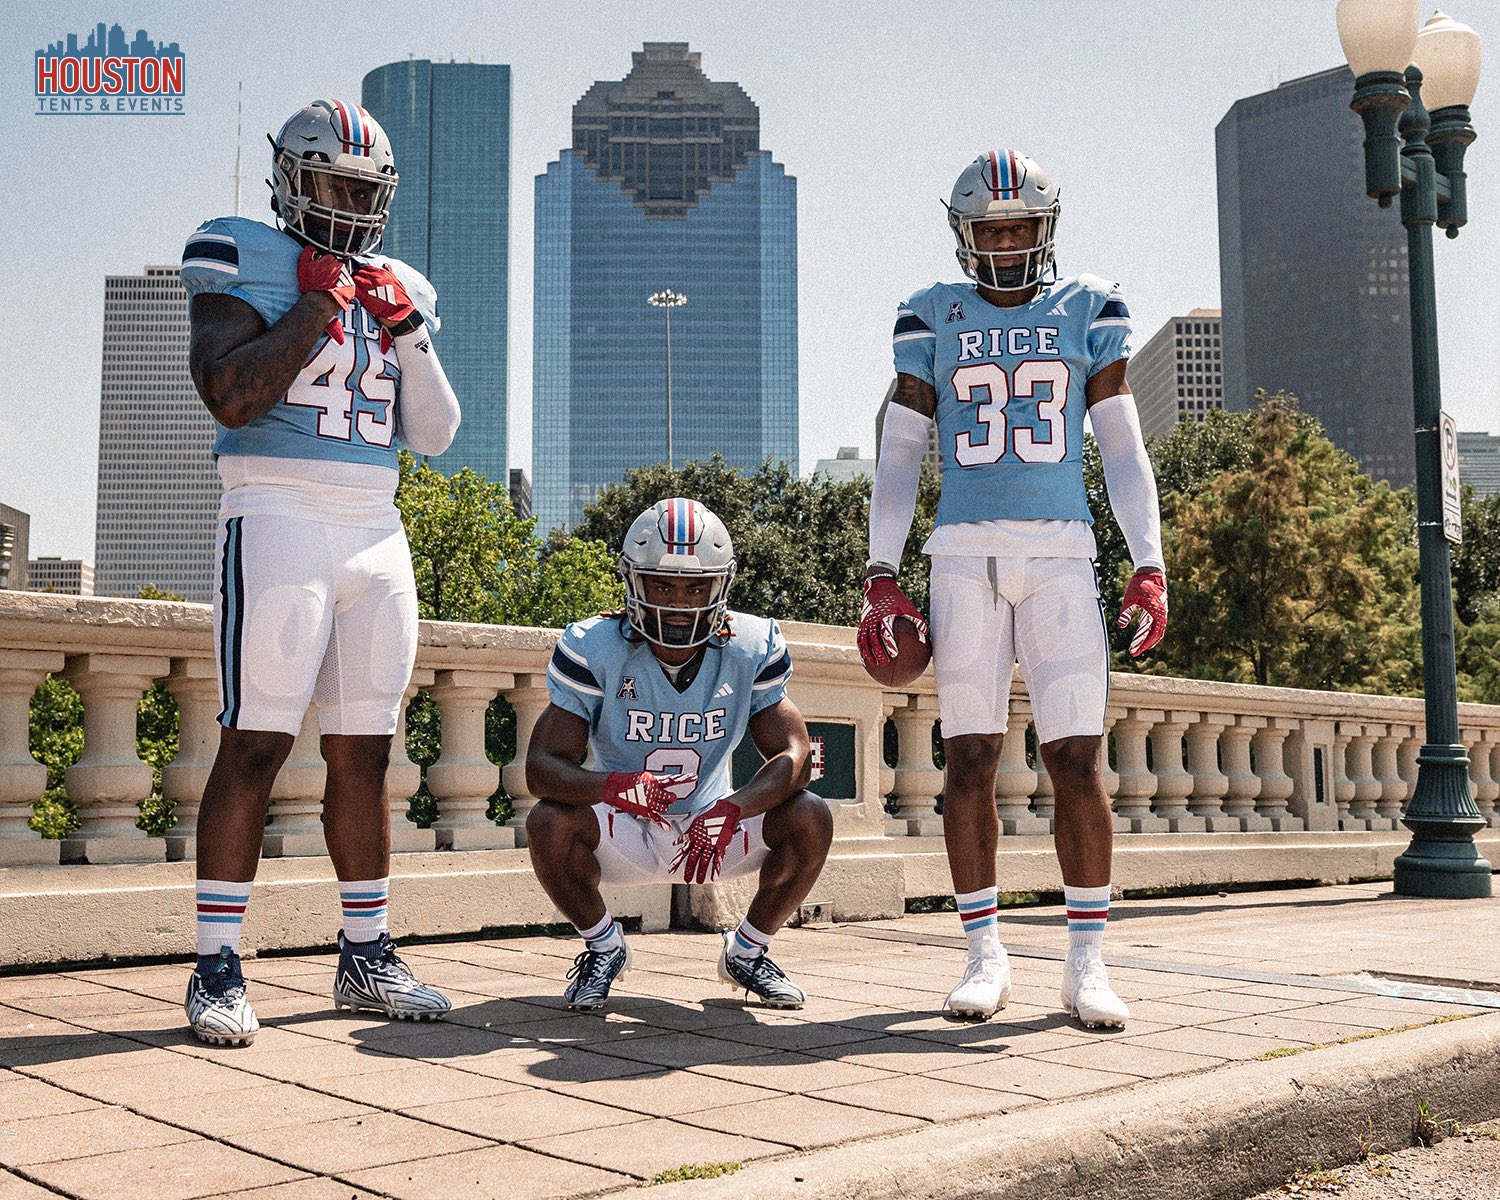 Report: Tennessee Titans To Wear Houston Oilers Throwback Uniforms